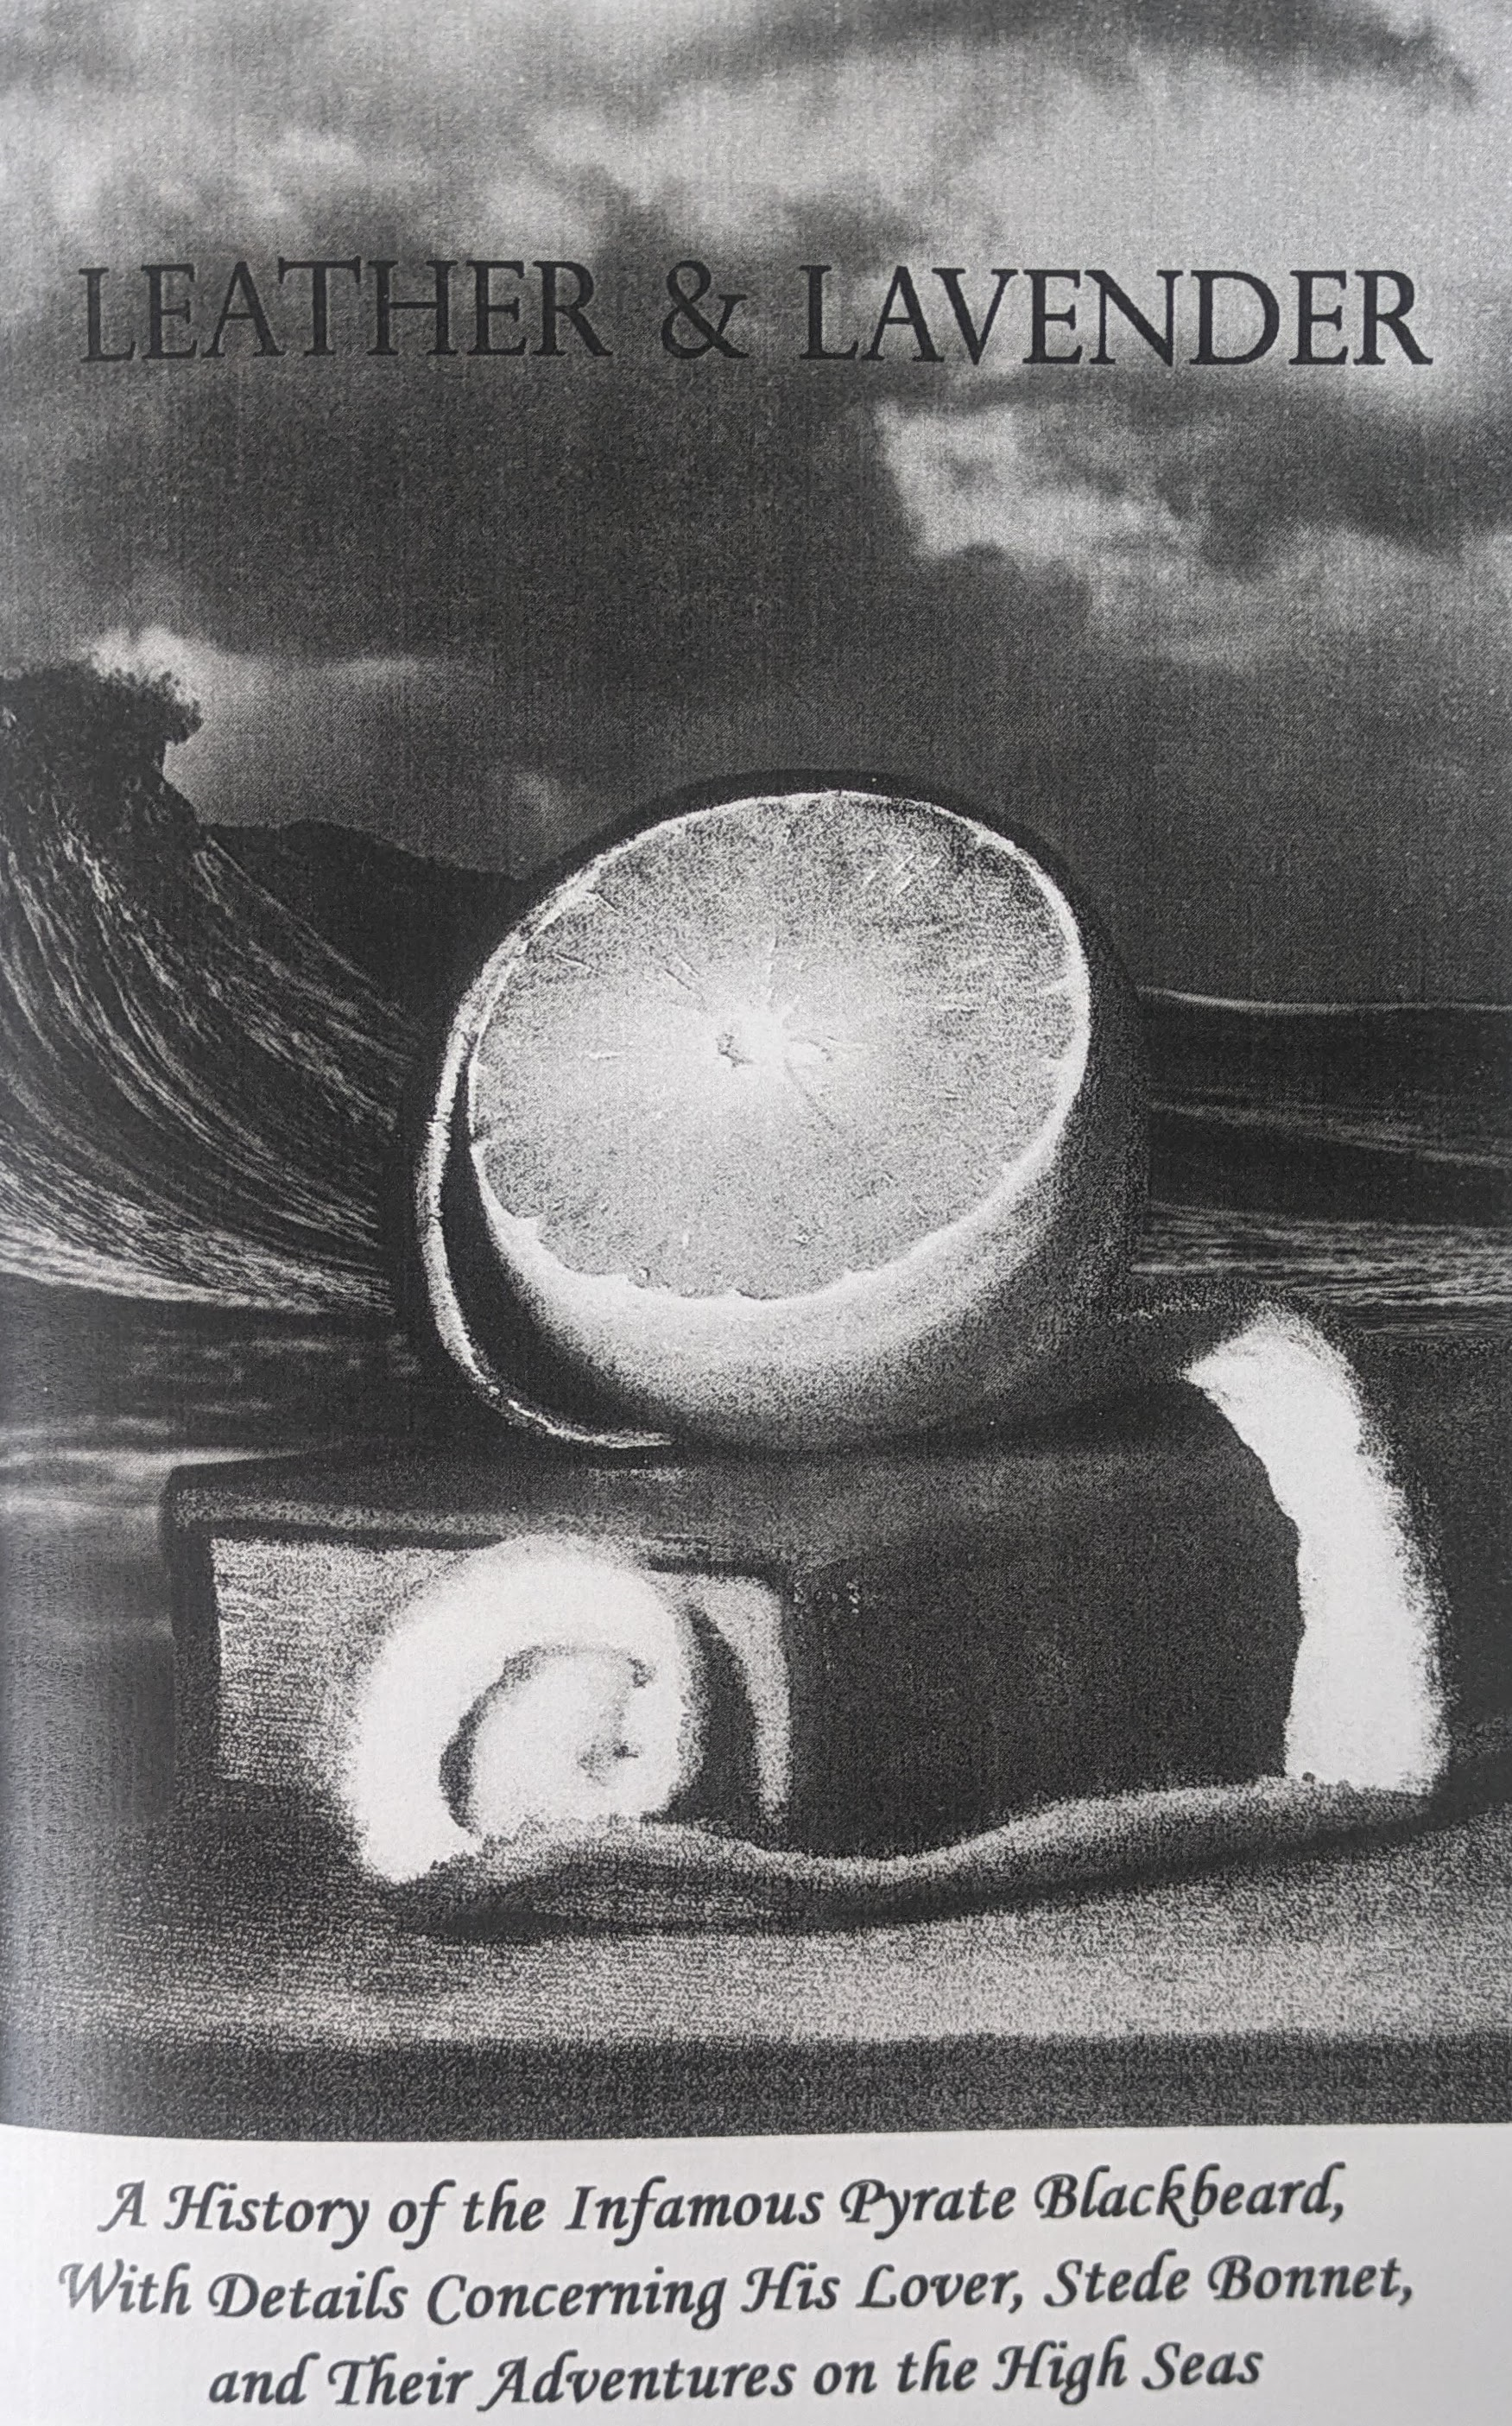 The cover of the zine “Leather and Lavender.” A half-peeled orange sits atop a leather book. In the background is the sea.